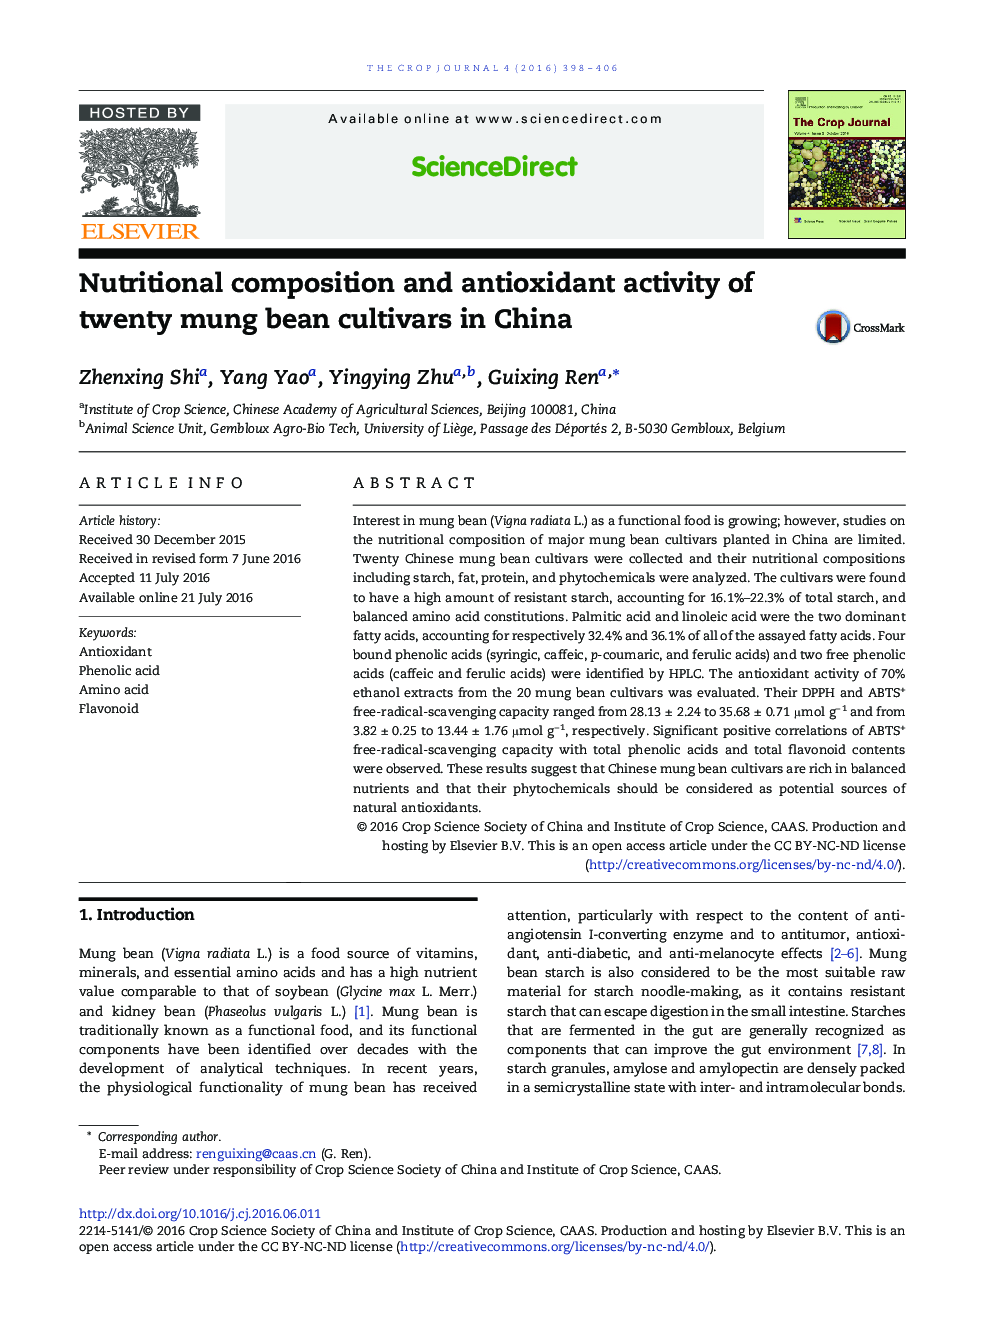 Nutritional composition and antioxidant activity of twenty mung bean cultivars in China